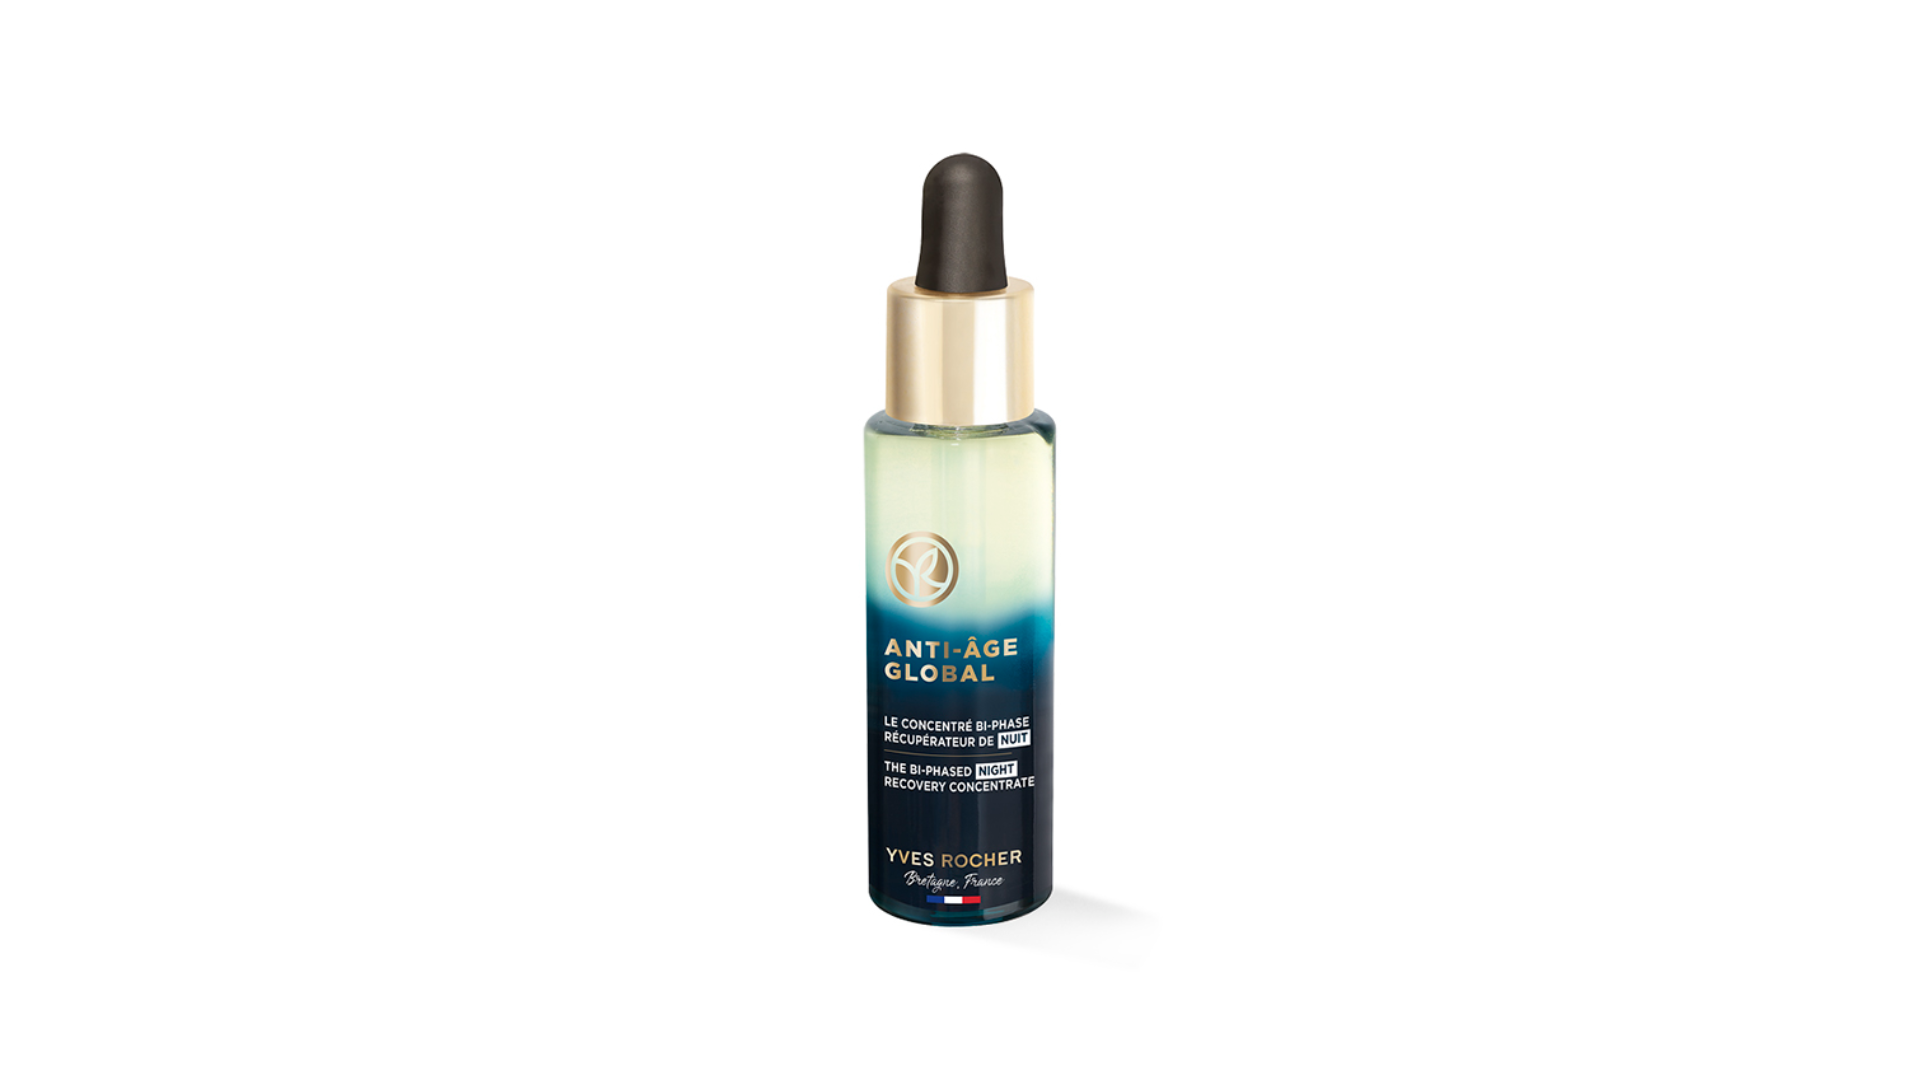 The Bi-Phased Night Recovery Concentrate